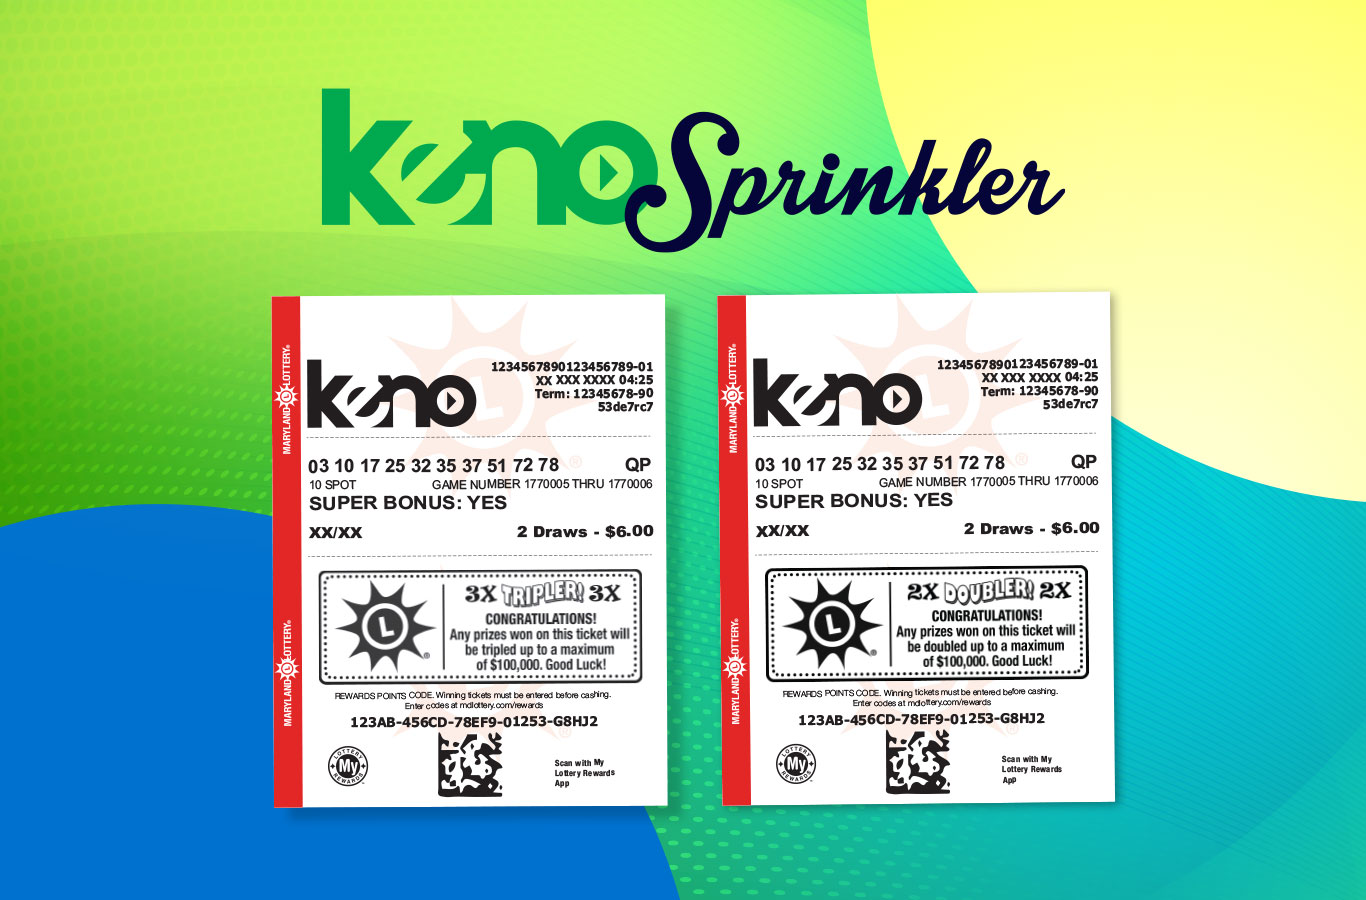 Double or triple your winnings with Keno Sprinkler!